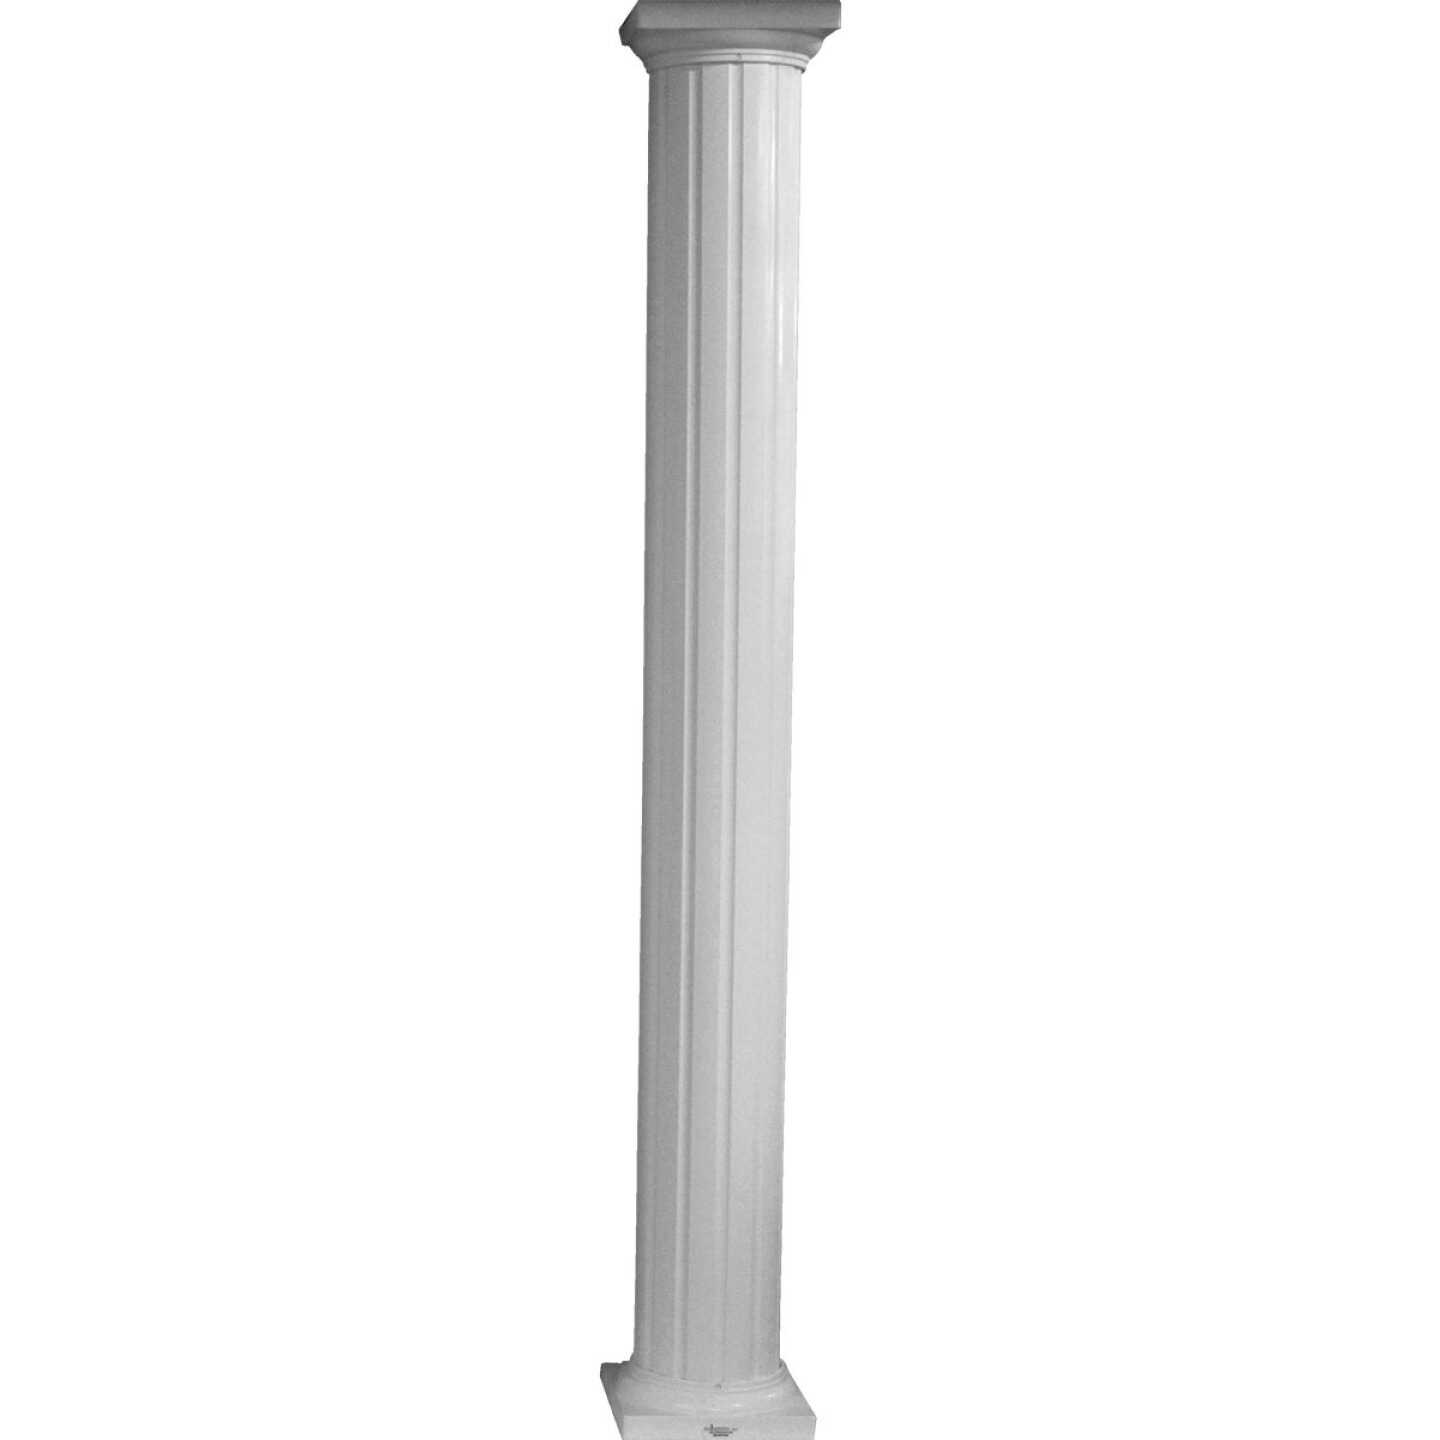 Crown Column 8 In. x 8 Ft. White Powder Coated Round Fluted Aluminum Column Image 1